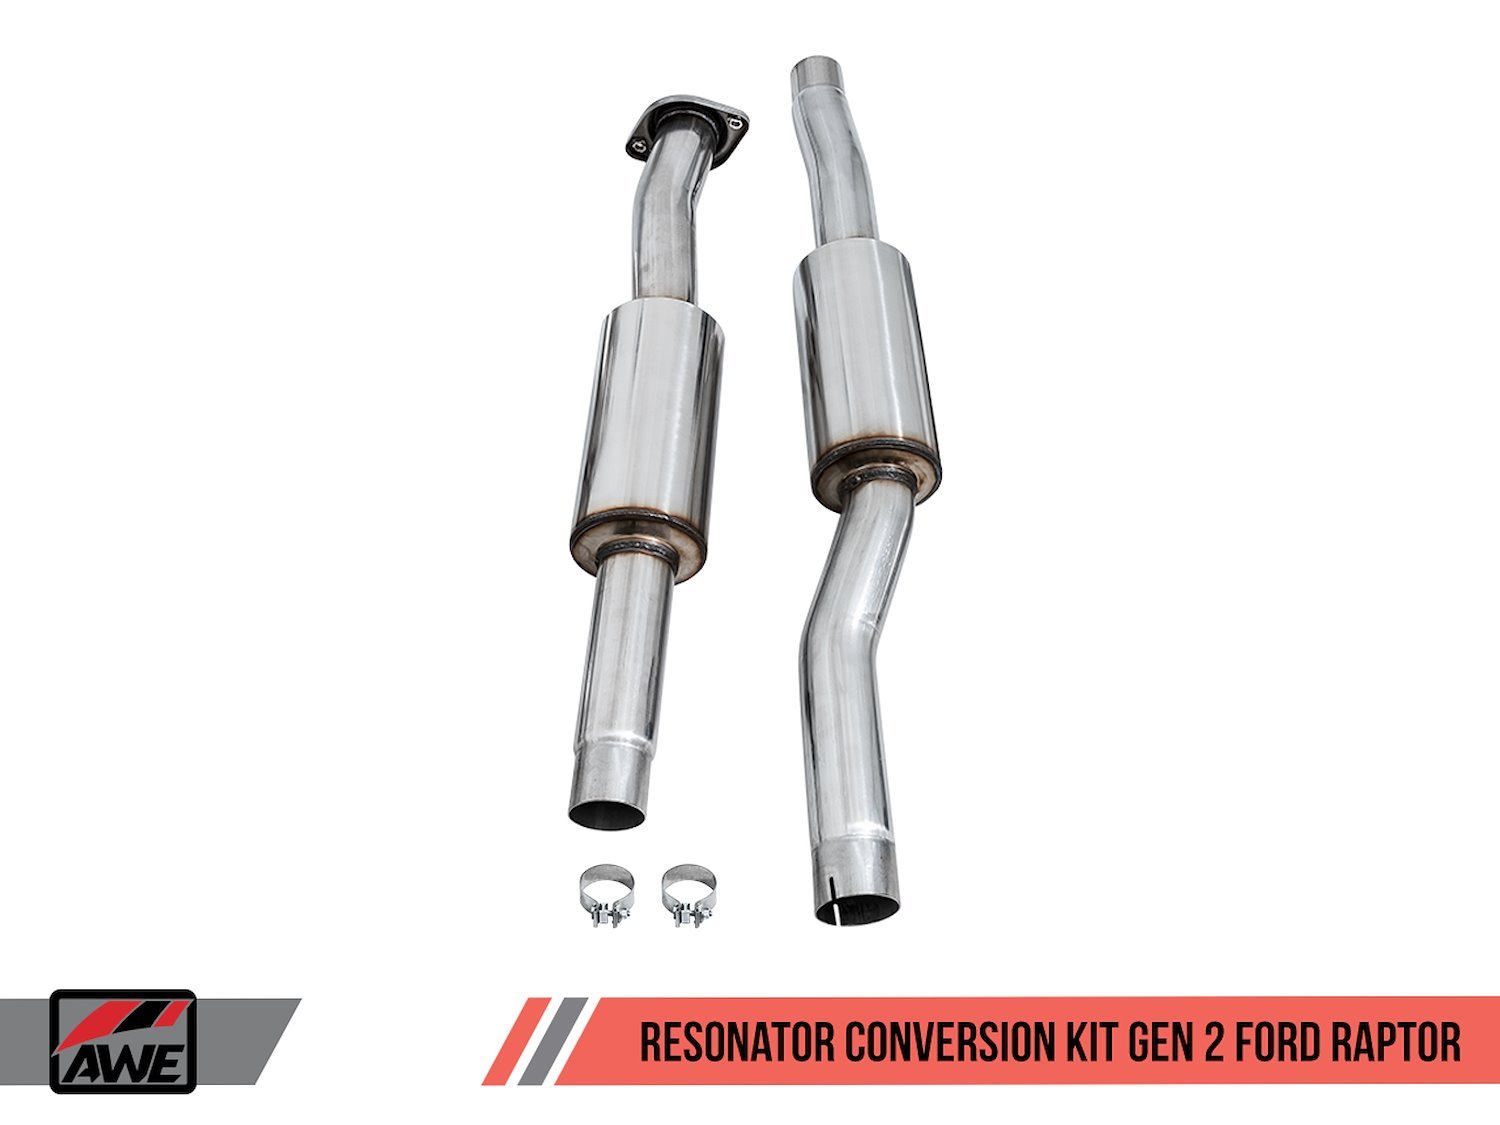 Resonated Front Pipe Conversion Kit for Ford Raptor (2FG to 1FG)